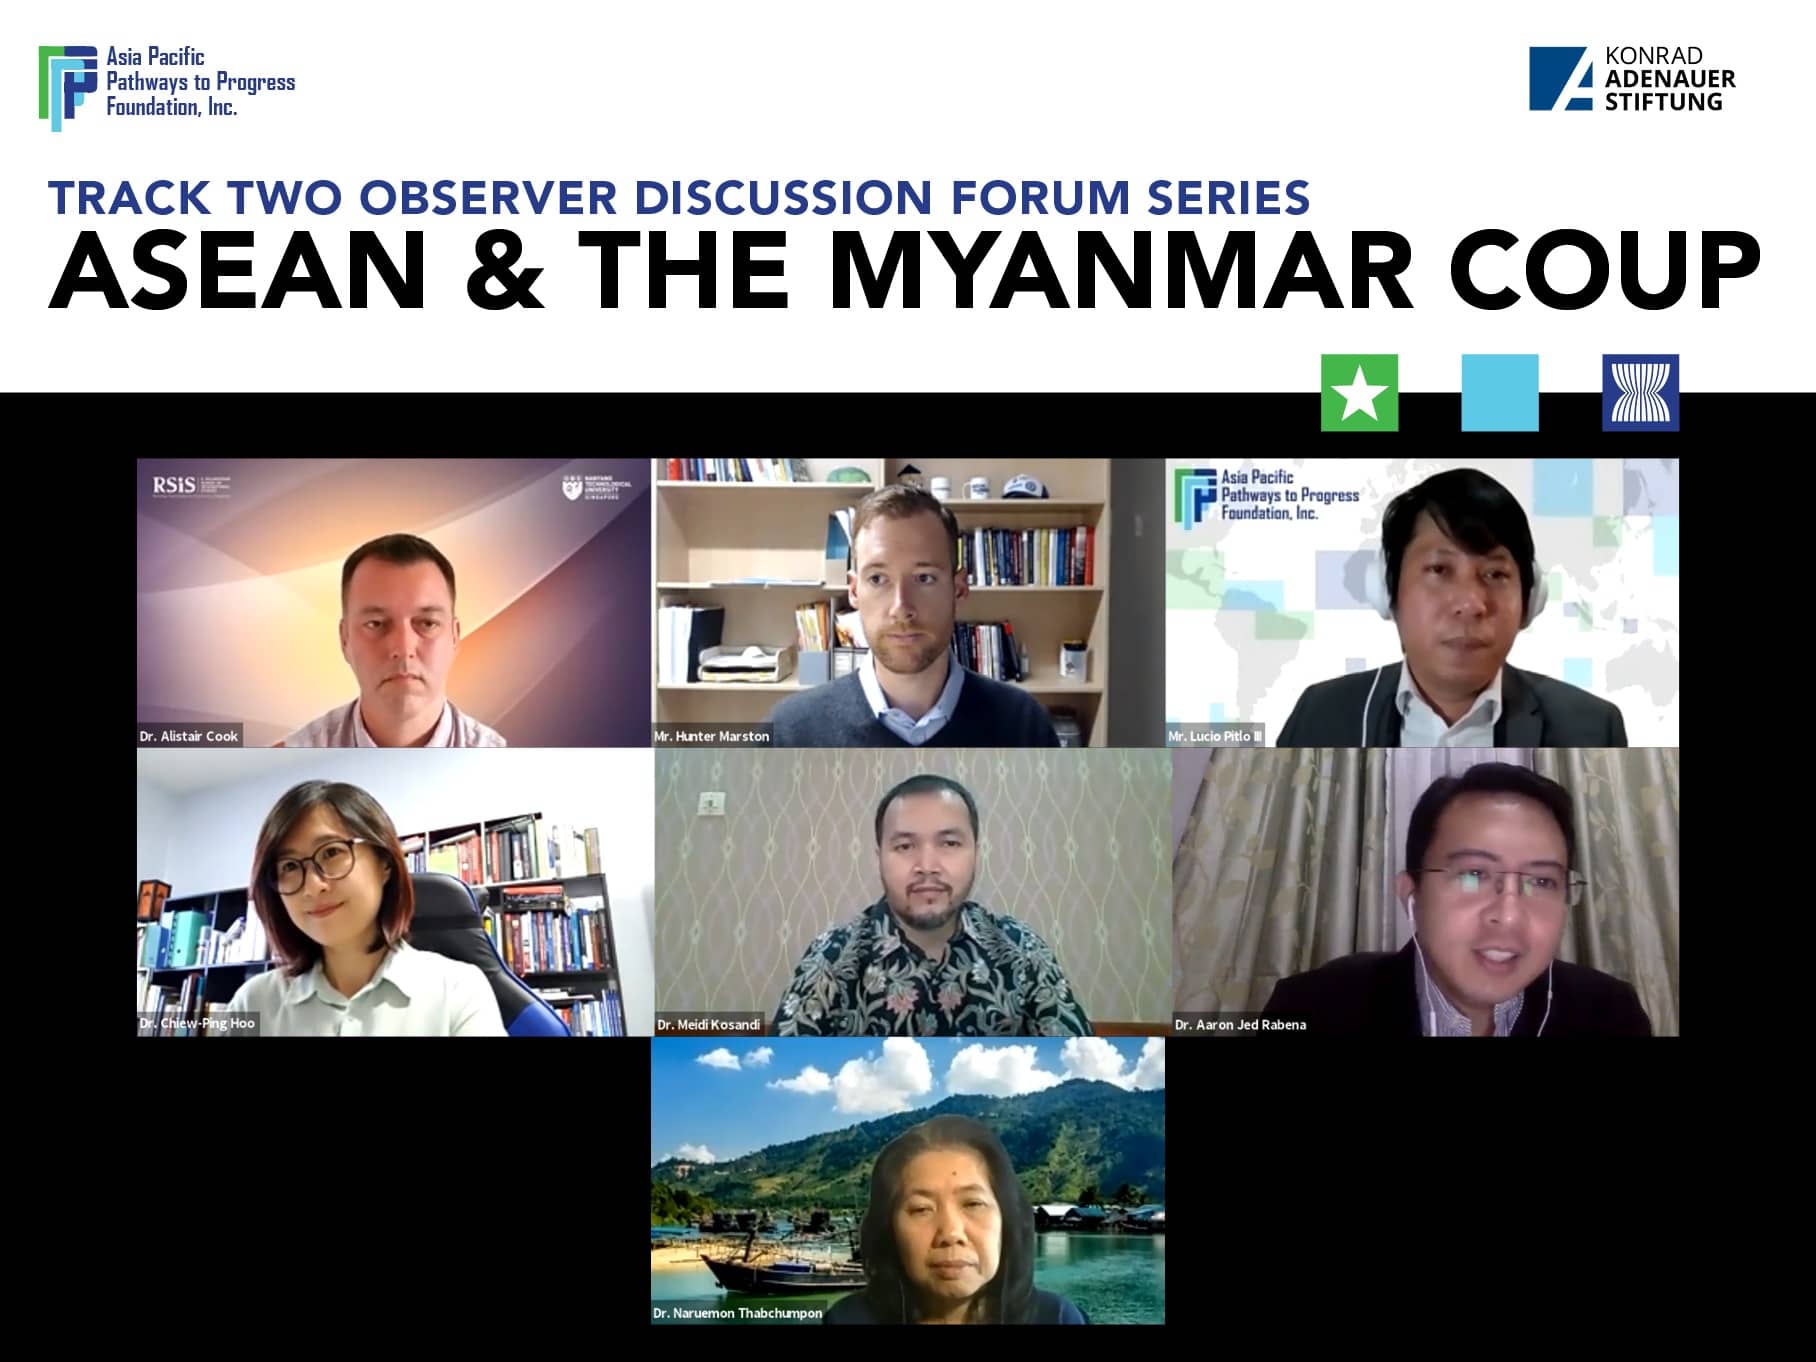 TTO Discussion Forum Kicks Off With Webinar on ASEAN and the Myanmar Coup